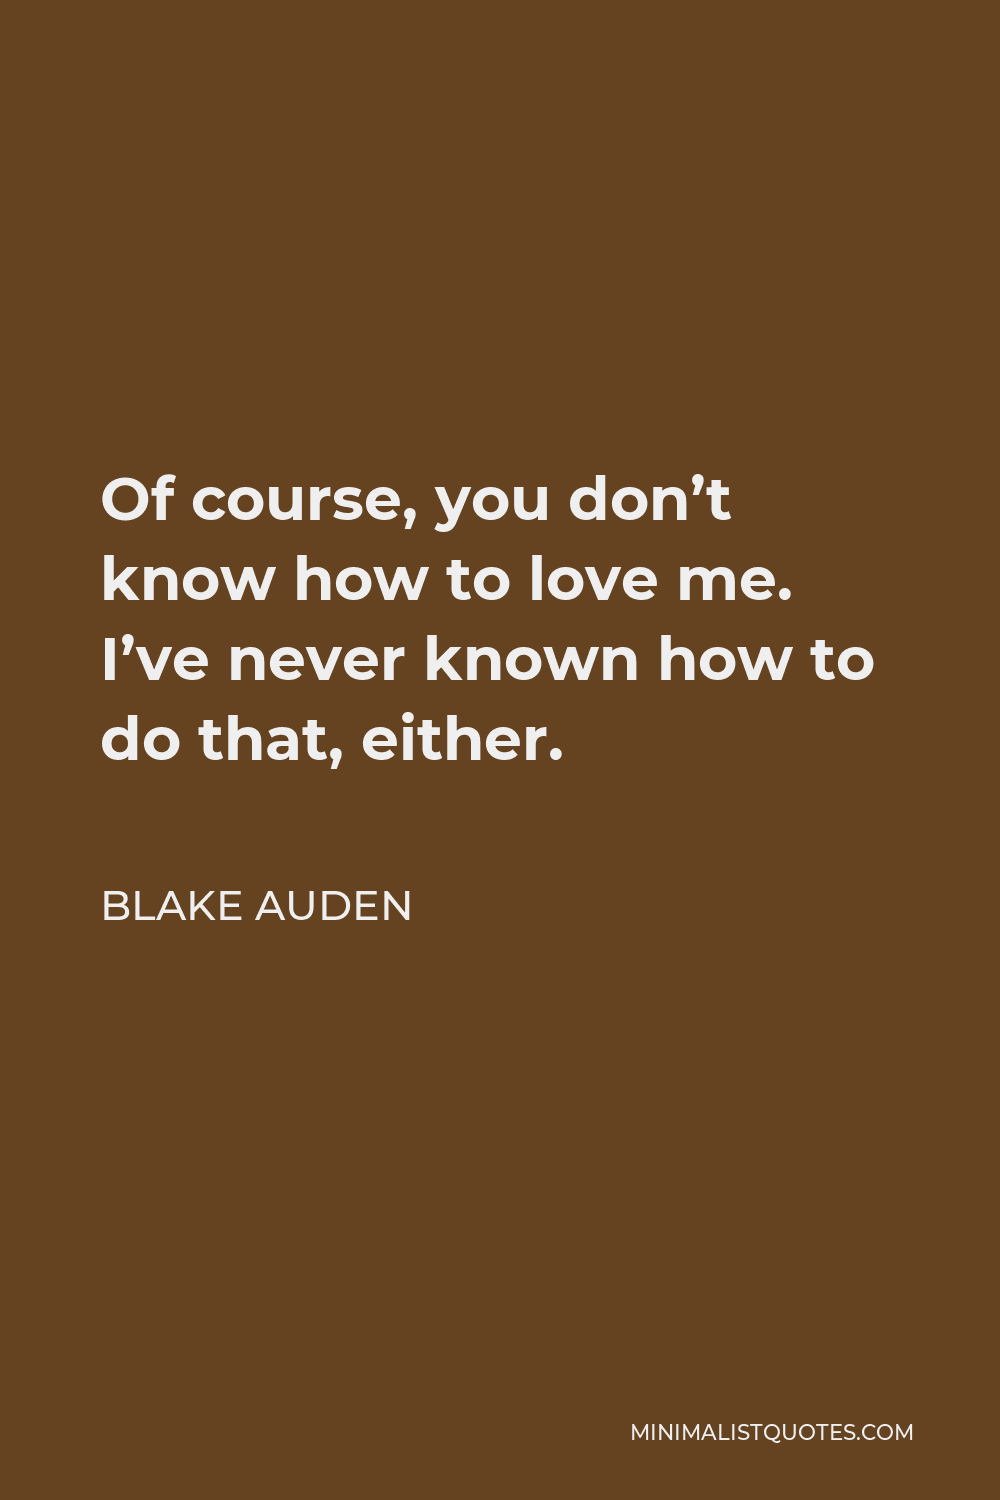 Blake Auden Quote - Of course, you don’t know how to love me. I’ve never known how to do that, either.